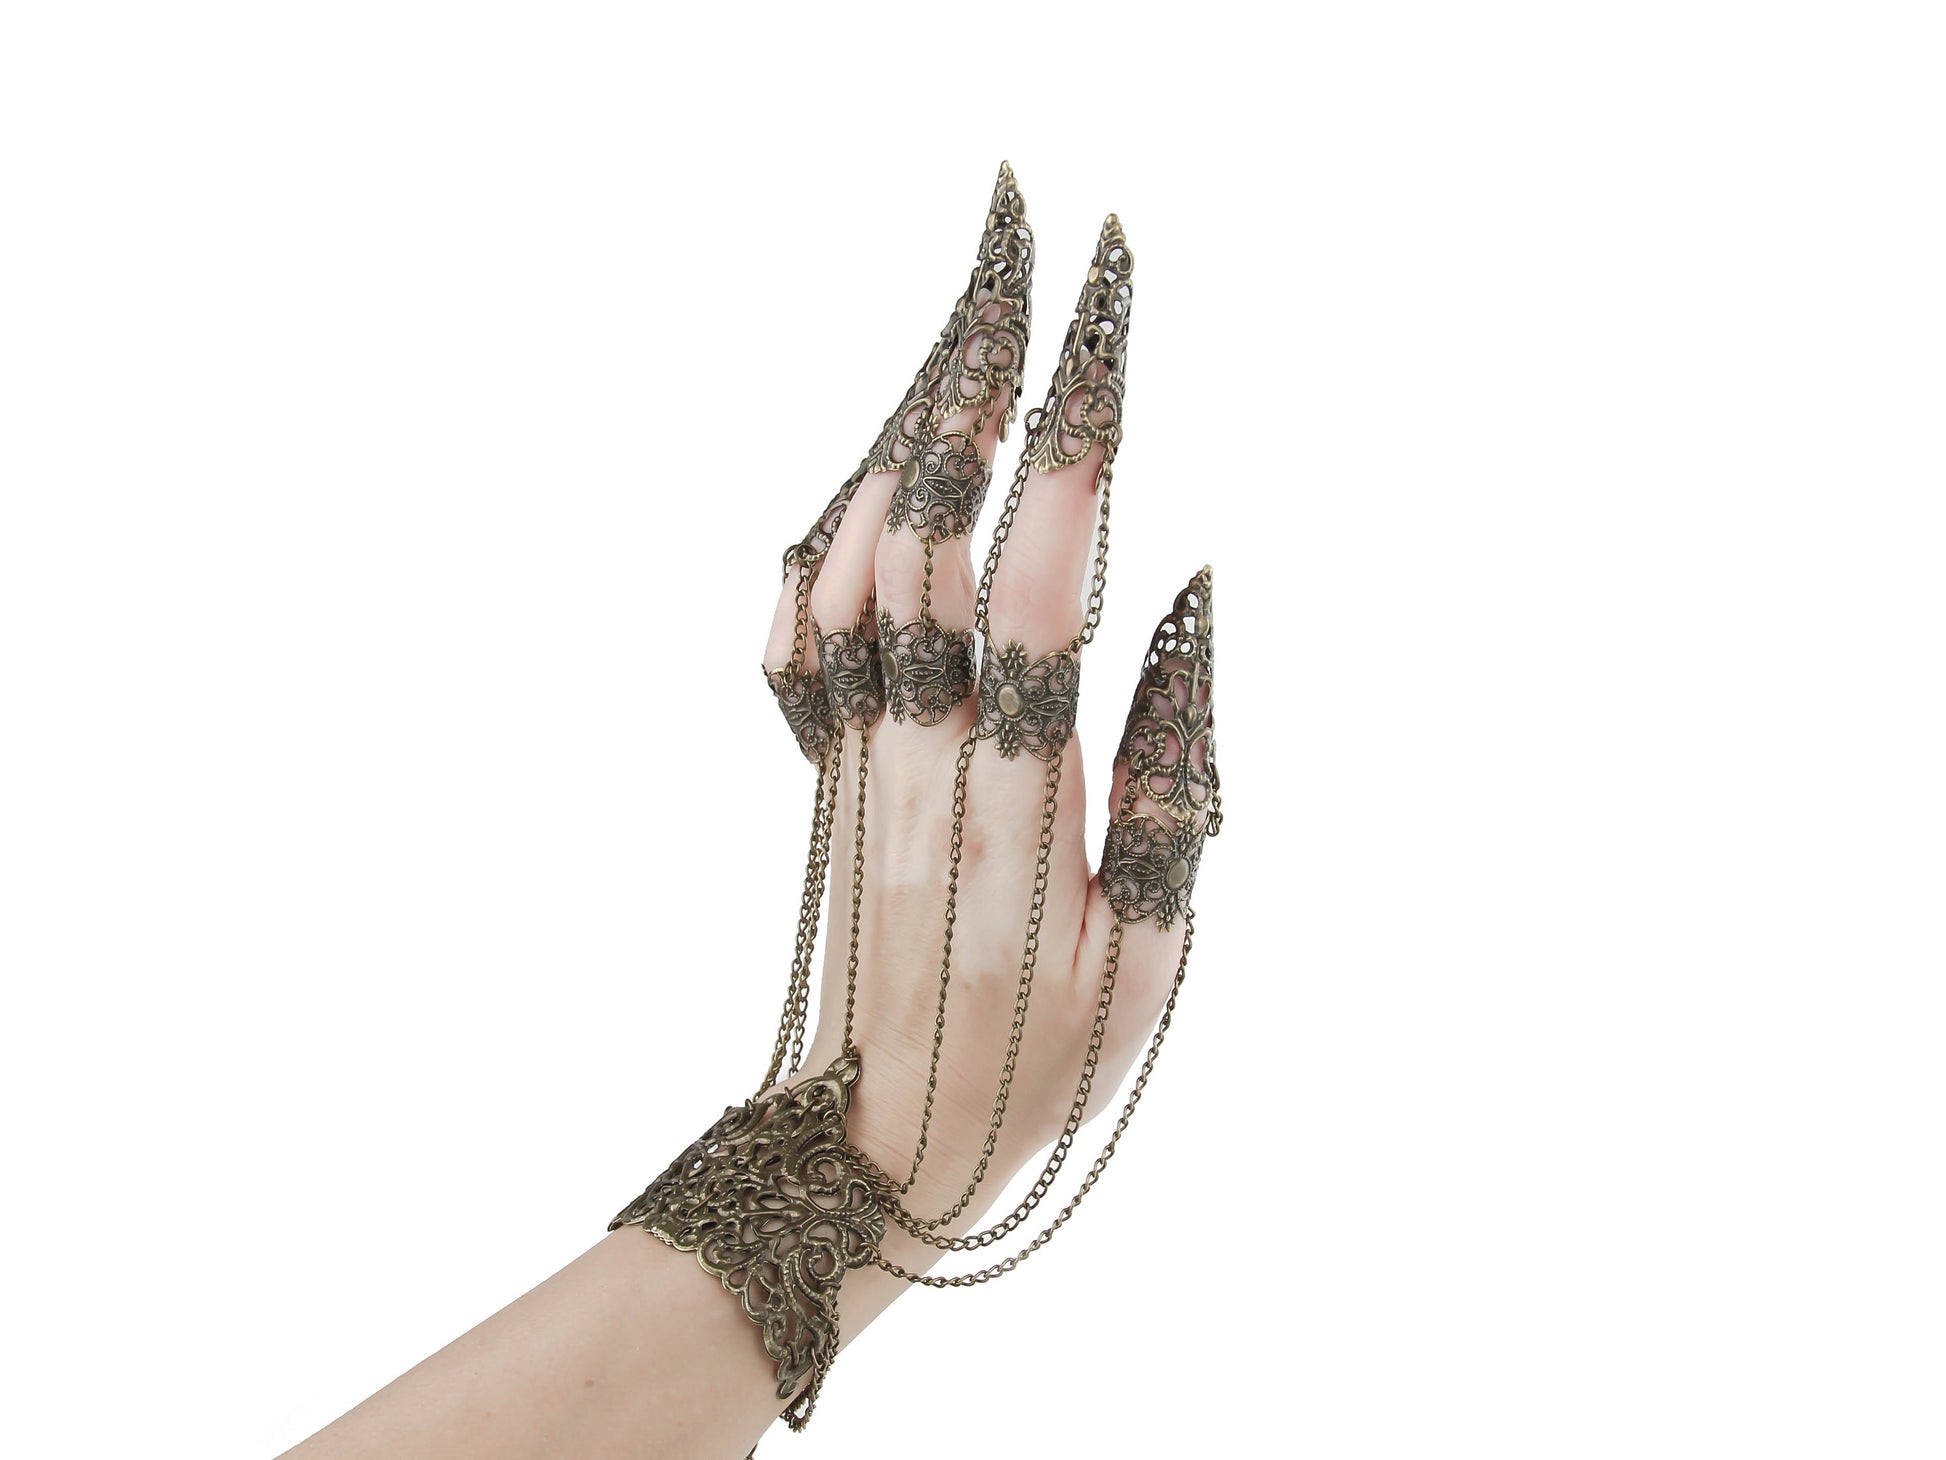 An intricate bronze metal glove with finger claw rings from Myril Jewels, blending gothic-chic style with neo-gothic artistry. Ideal for those seeking bold witchcore jewelry, it’s perfect for Halloween, rave parties, or as a standout piece in a minimal goth wardrobe.